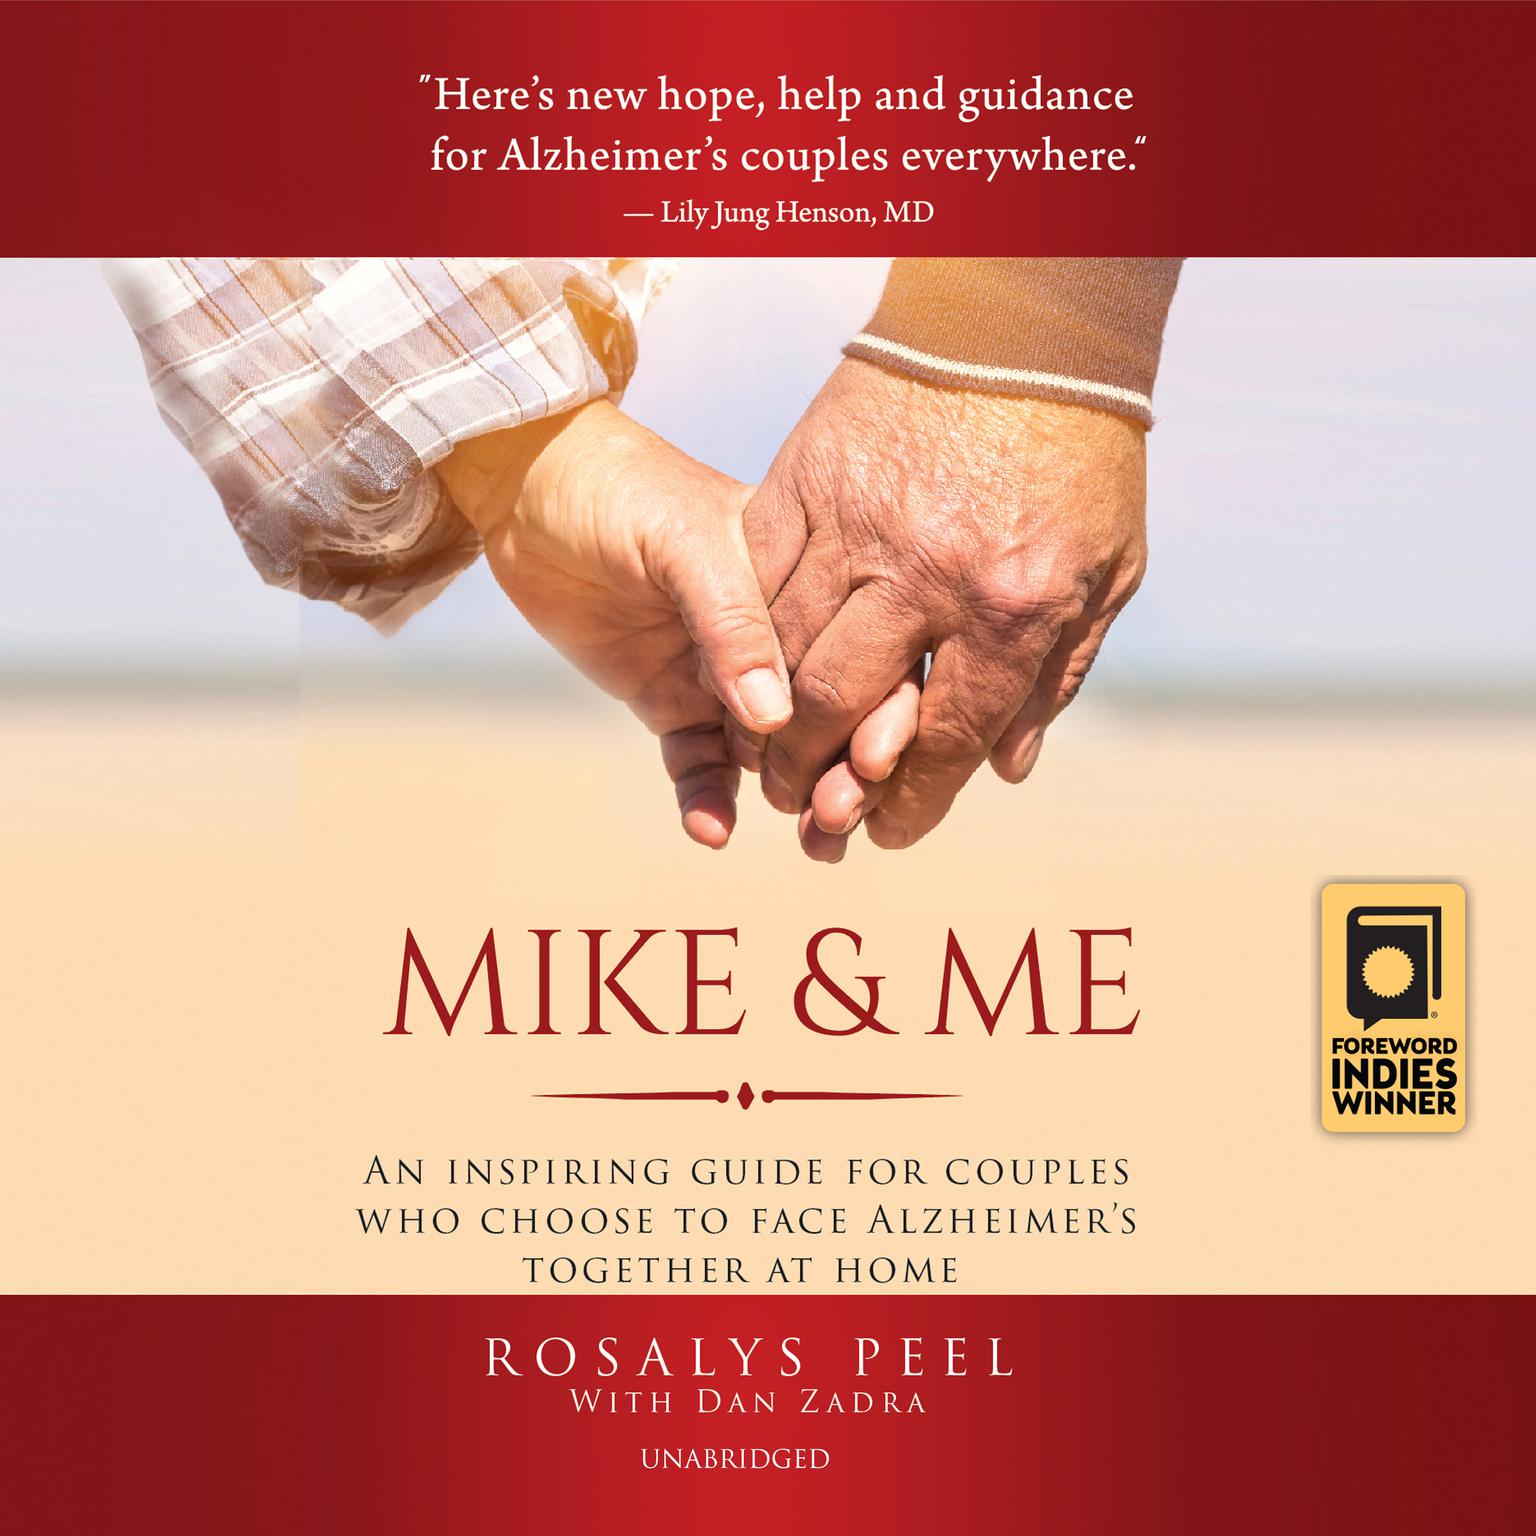 Mike & Me: An Inspiring Guide for Couples Who Choose to Face Alzheimer’s Together at Home Audiobook, by Rosalys Peel